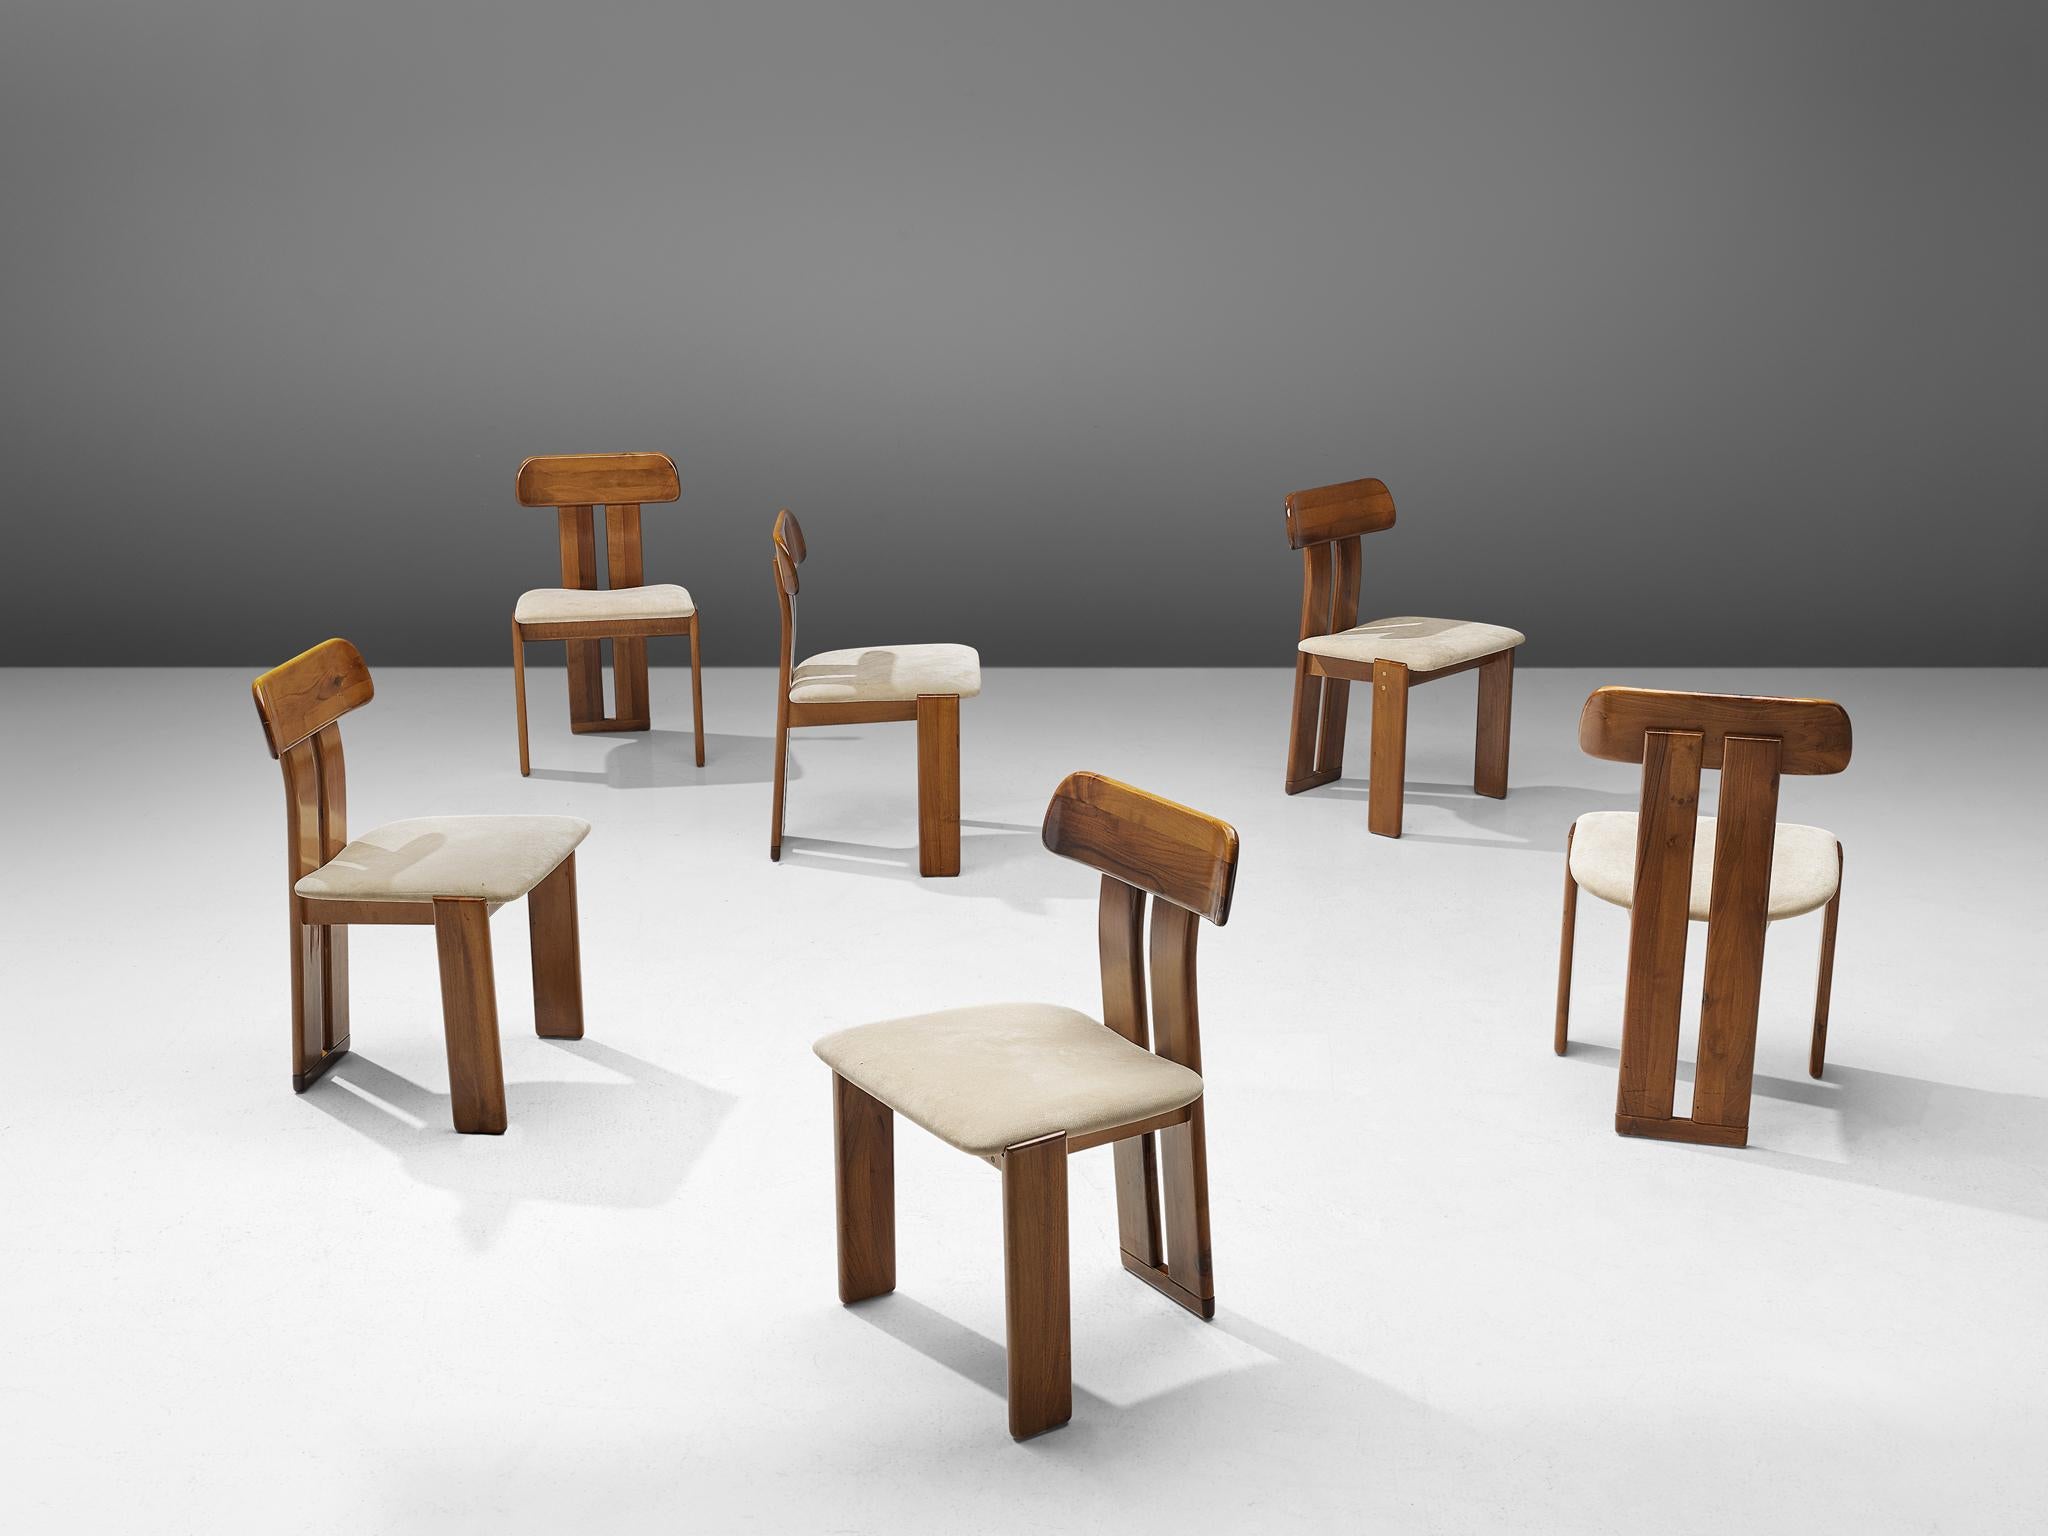 Sapporo for Girgi Mobil, set of 6 dining chairs, Italian walnut and off-white fabric, Italy, 1970s.

Set of sculptural chairs that feature wonderful backrests, consisting of two vertical slats distanced from each other. At the bottom and top these